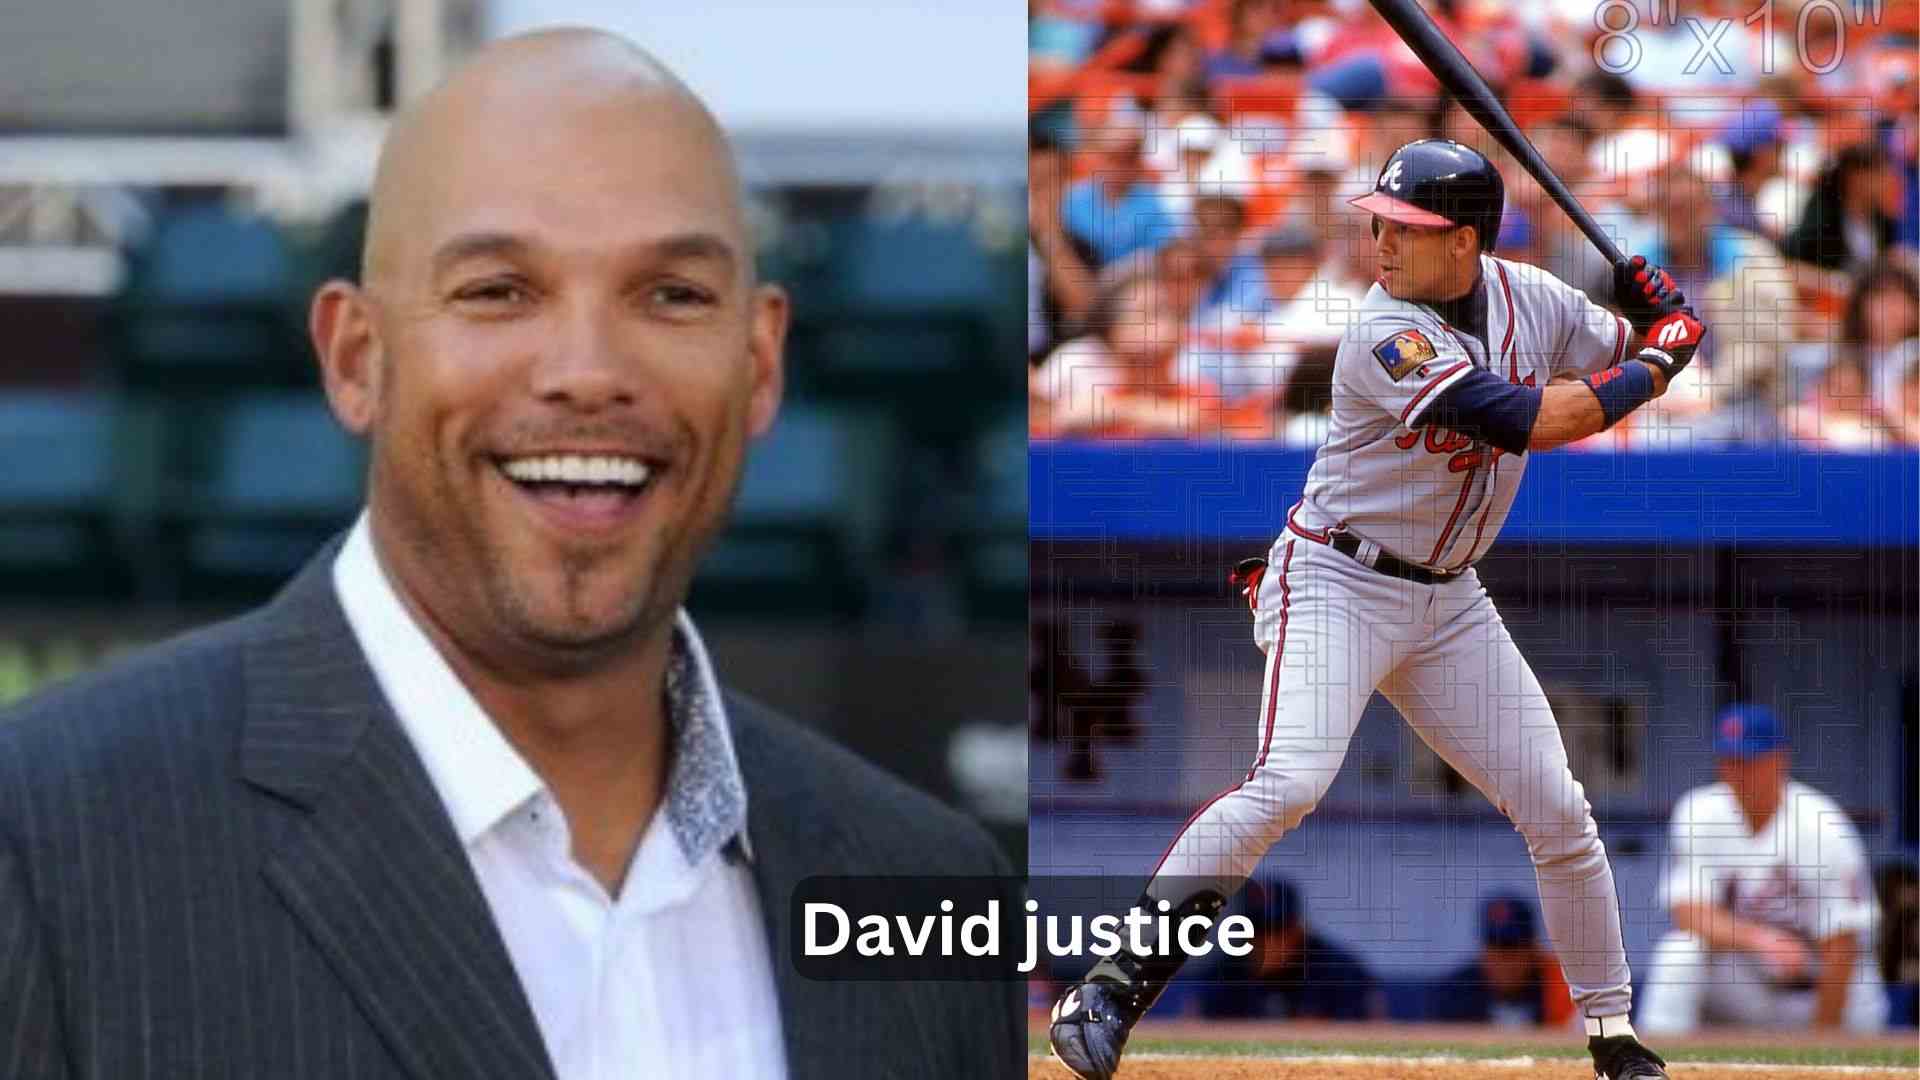 David Justice, Net worth, Career, relationships : All you need to know